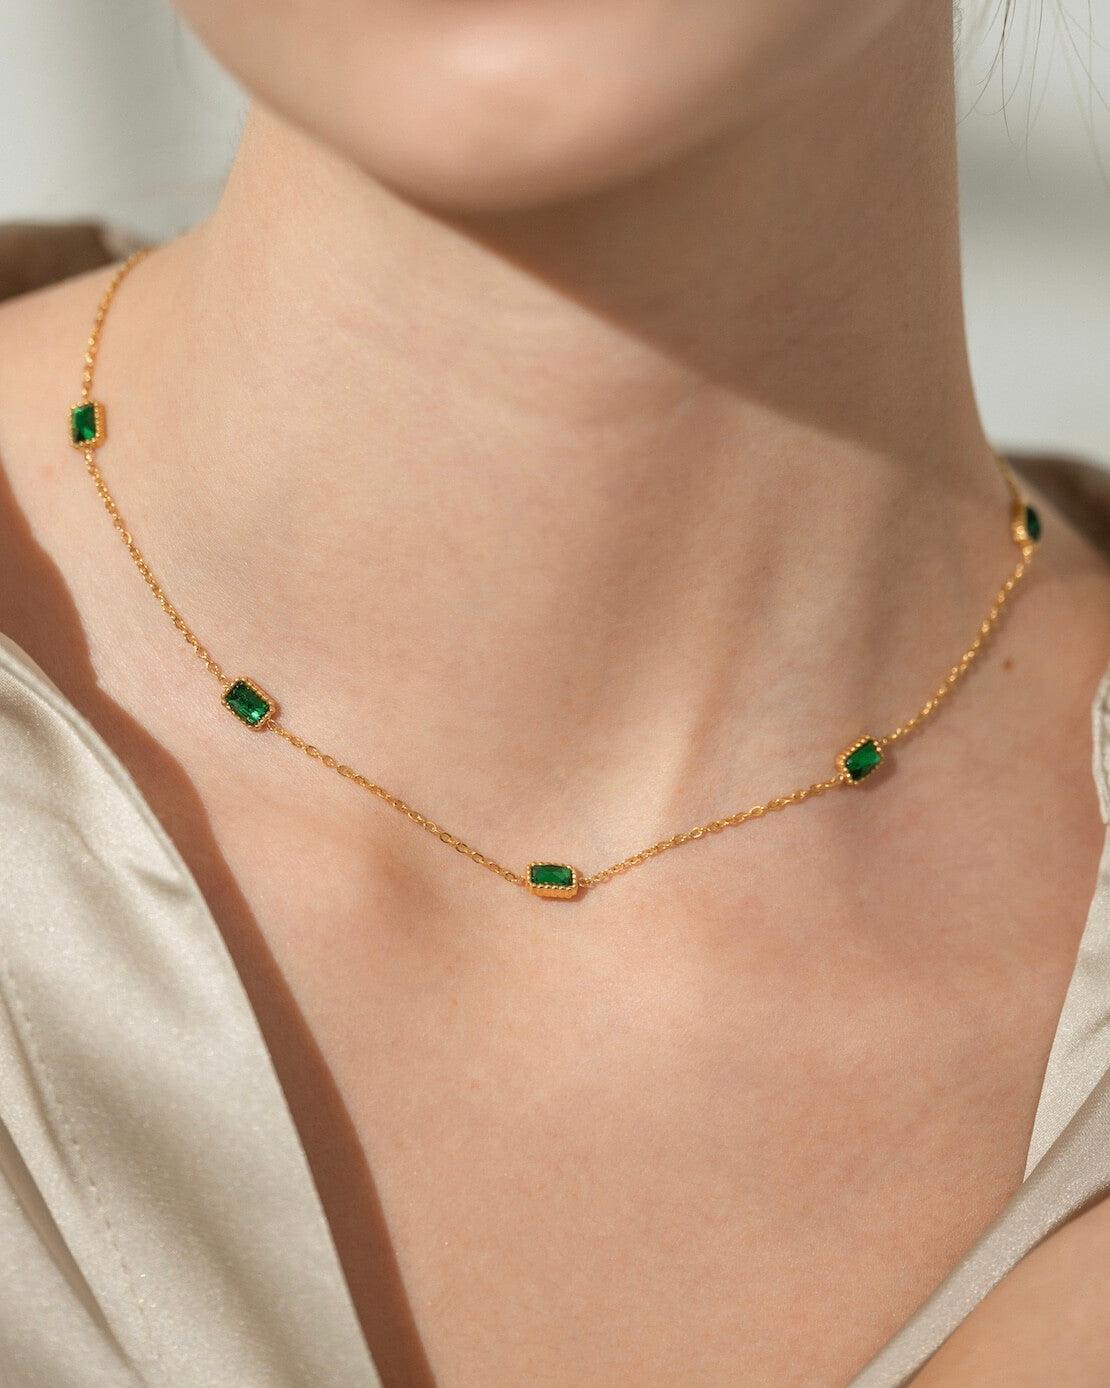 GREEN STONE NECKLACE - LIMELY